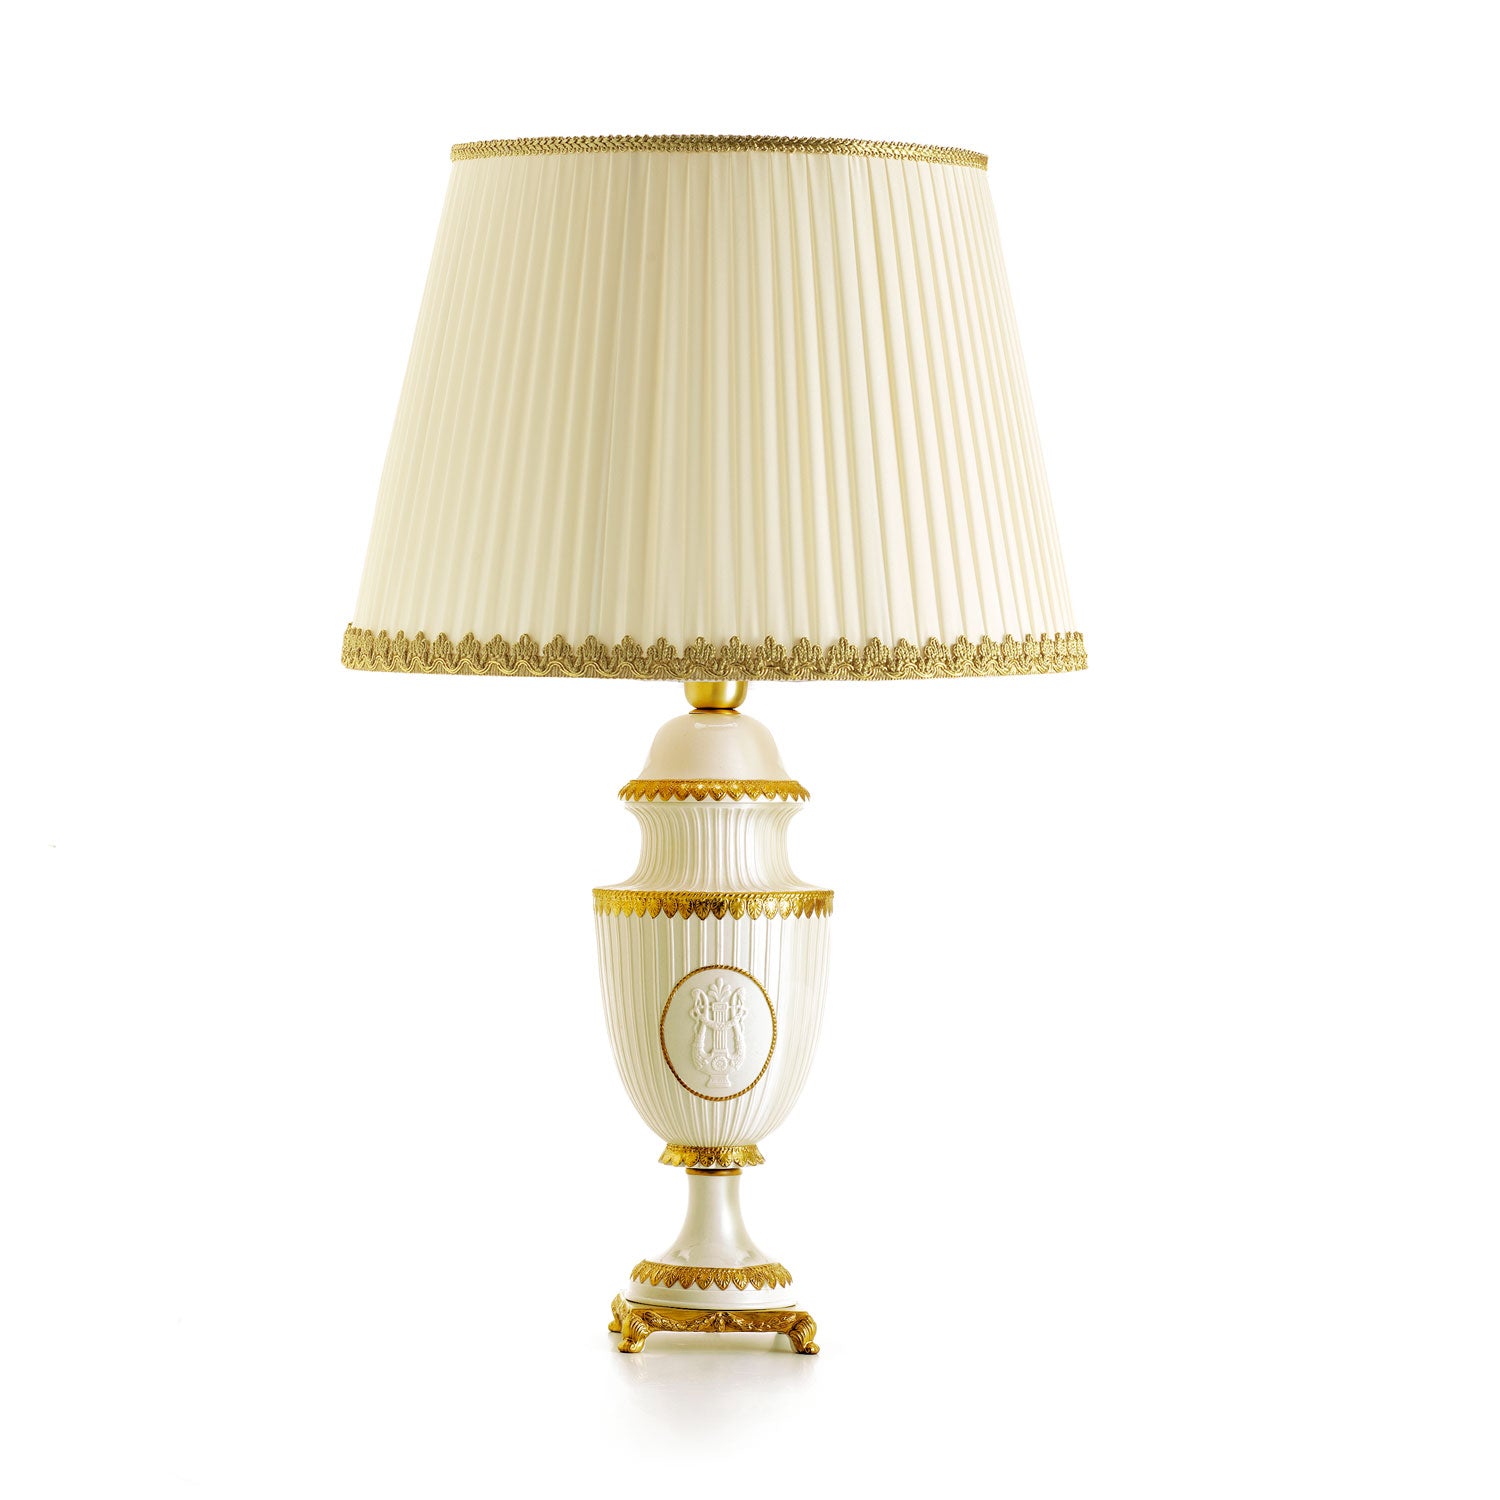 Napoleone II Large Gold and White Table Lamp - Alternative view 1